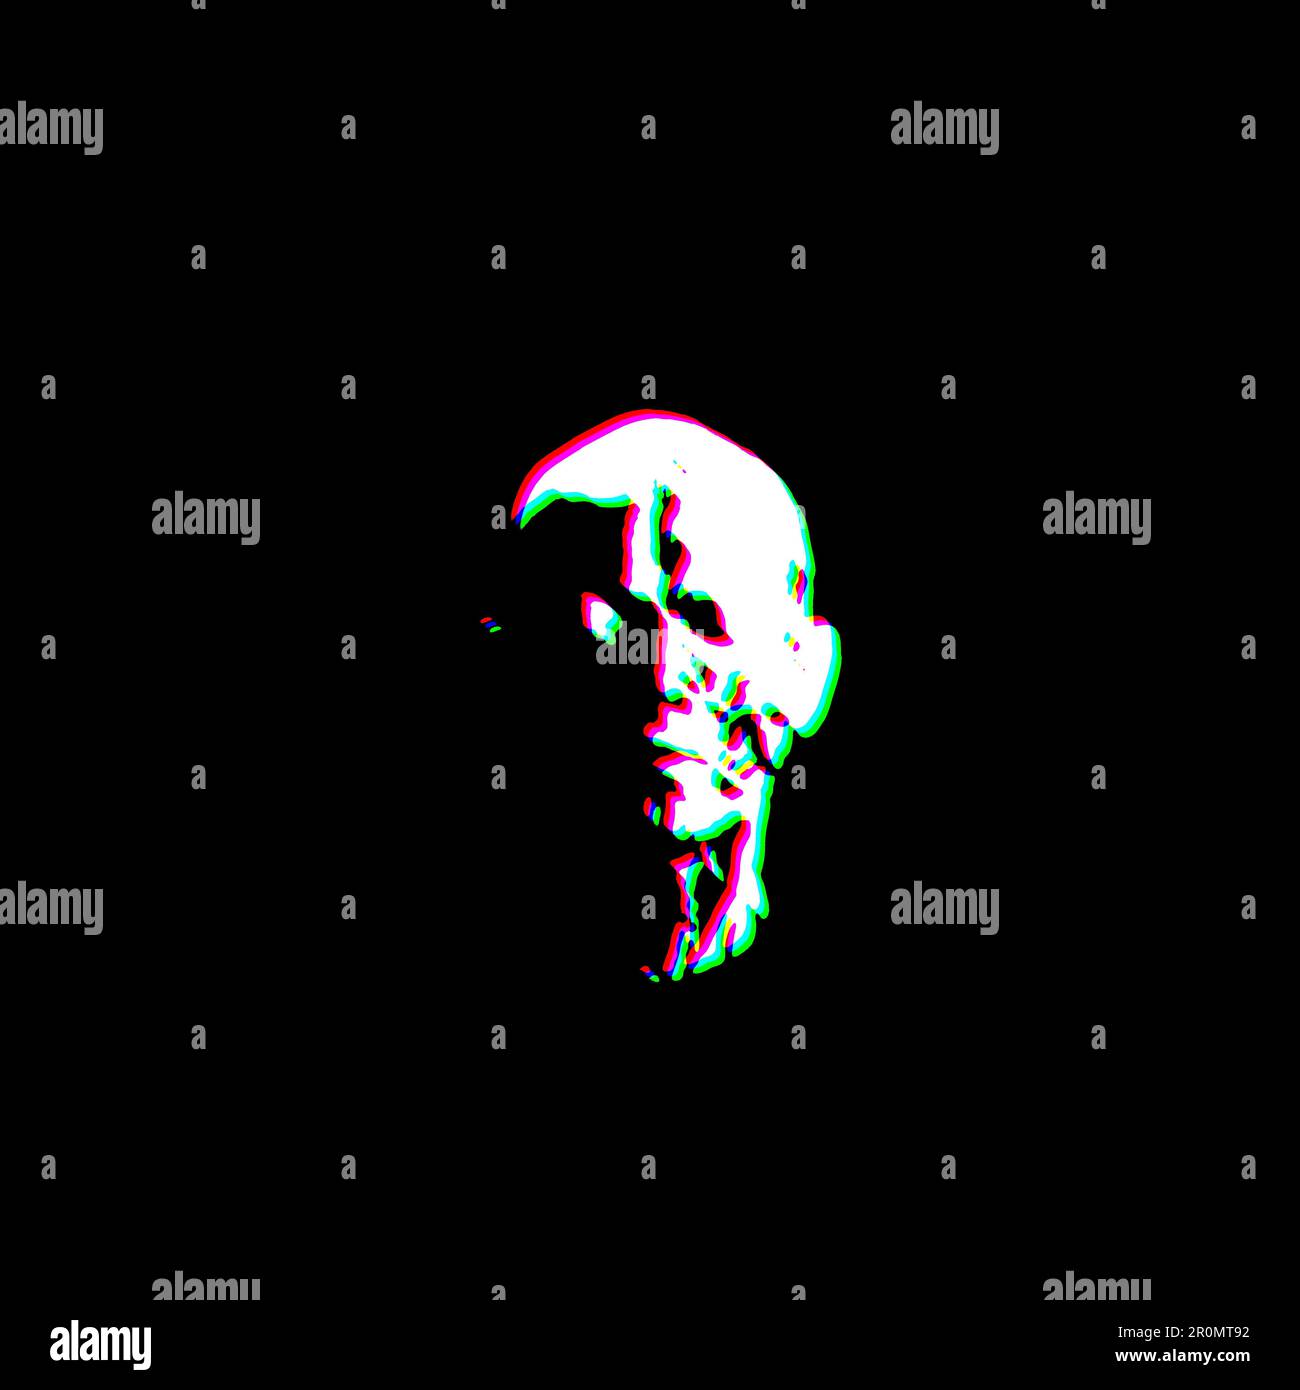 White Black Ecorche Human Head Grudge Scratched Dirty Punk Style Print Culture Symbol Shape Graphic Red Green illustration Stock Photo